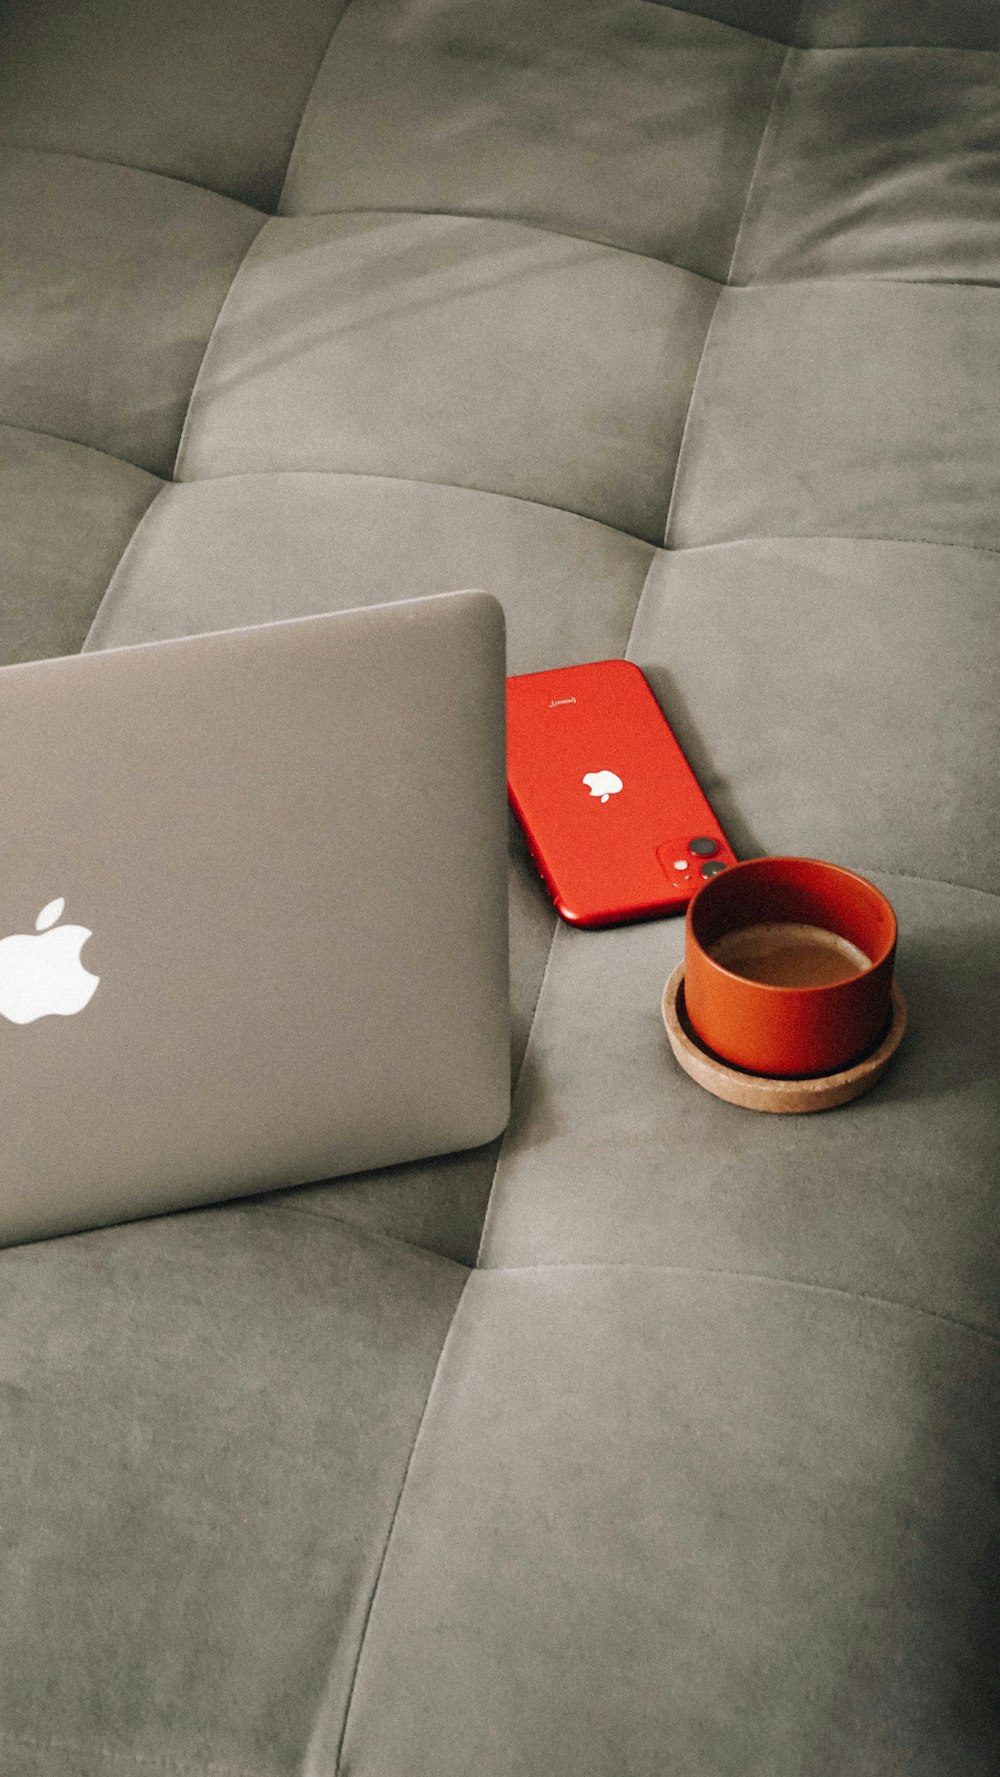 an apple laptop sitting on a couch next to a cup of coffee